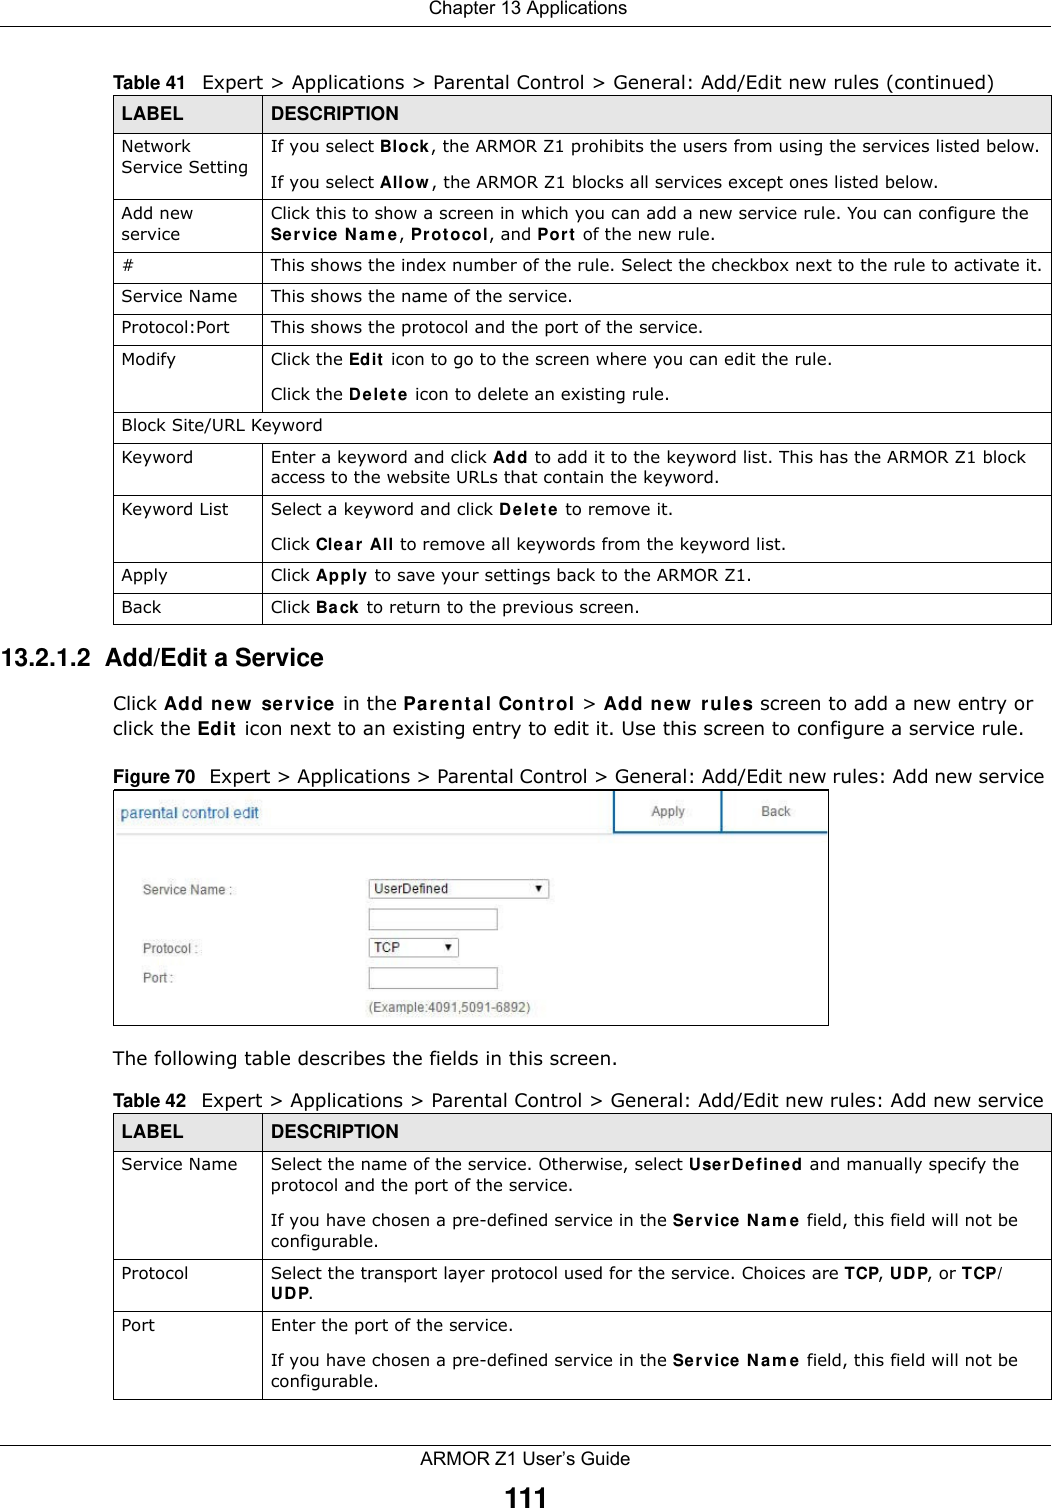  Chapter 13 ApplicationsARMOR Z1 User’s Guide11113.2.1.2  Add/Edit a ServiceClick Add new service in the Parental Control &gt; Add new rules screen to add a new entry or click the Edit icon next to an existing entry to edit it. Use this screen to configure a service rule.Figure 70   Expert &gt; Applications &gt; Parental Control &gt; General: Add/Edit new rules: Add new service The following table describes the fields in this screen. Network Service Setting If you select Block, the ARMOR Z1 prohibits the users from using the services listed below.If you select Allow, the ARMOR Z1 blocks all services except ones listed below.Add new serviceClick this to show a screen in which you can add a new service rule. You can configure the Service Name, Protocol, and Port of the new rule.#This shows the index number of the rule. Select the checkbox next to the rule to activate it.Service Name This shows the name of the service.Protocol:Port This shows the protocol and the port of the service.Modify Click the Edit icon to go to the screen where you can edit the rule.Click the Delete icon to delete an existing rule.Block Site/URL KeywordKeyword Enter a keyword and click Add to add it to the keyword list. This has the ARMOR Z1 block access to the website URLs that contain the keyword.Keyword List Select a keyword and click Delete to remove it. Click Clear All to remove all keywords from the keyword list.Apply Click Apply to save your settings back to the ARMOR Z1.Back Click Back to return to the previous screen.Table 41   Expert &gt; Applications &gt; Parental Control &gt; General: Add/Edit new rules (continued)LABEL DESCRIPTIONTable 42   Expert &gt; Applications &gt; Parental Control &gt; General: Add/Edit new rules: Add new serviceLABEL DESCRIPTIONService Name Select the name of the service. Otherwise, select UserDefined and manually specify the protocol and the port of the service.If you have chosen a pre-defined service in the Service Name field, this field will not be configurable.Protocol Select the transport layer protocol used for the service. Choices are TCP, UDP, or TCP/UDP. Port Enter the port of the service. If you have chosen a pre-defined service in the Service Name field, this field will not be configurable.